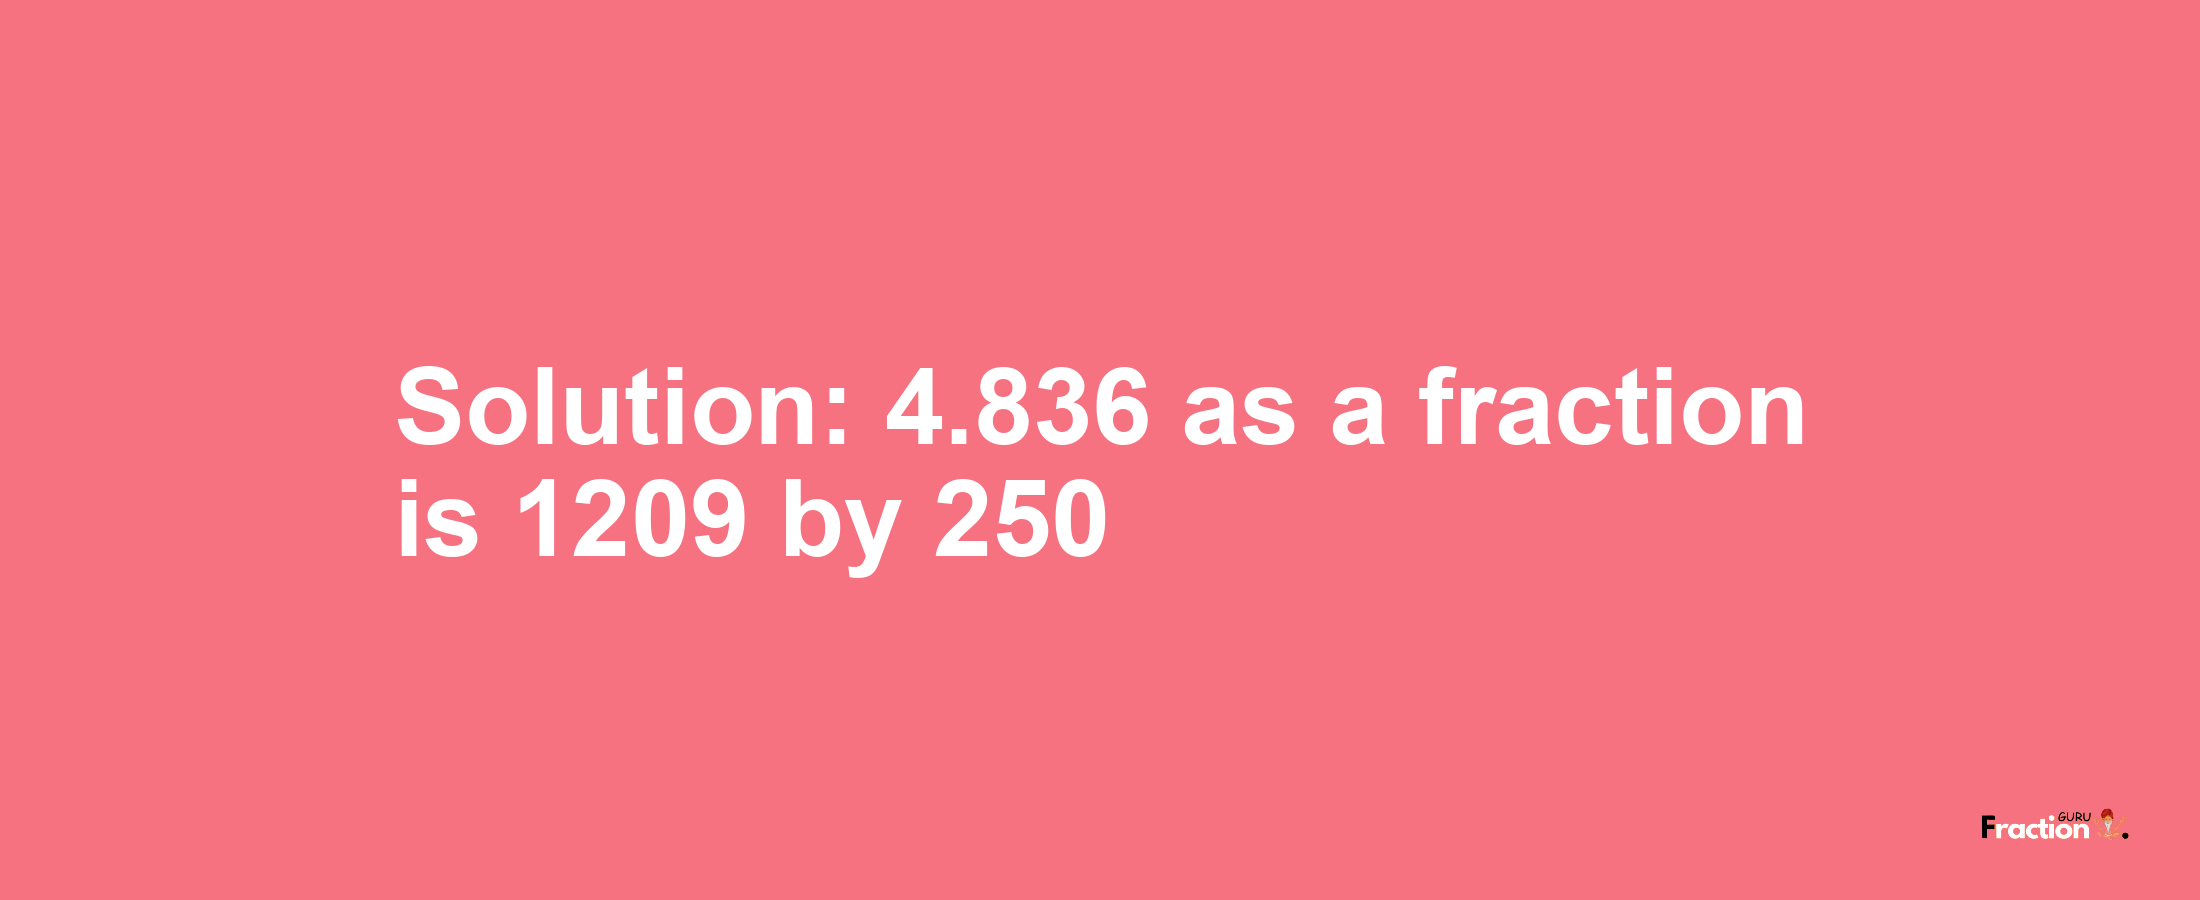 Solution:4.836 as a fraction is 1209/250